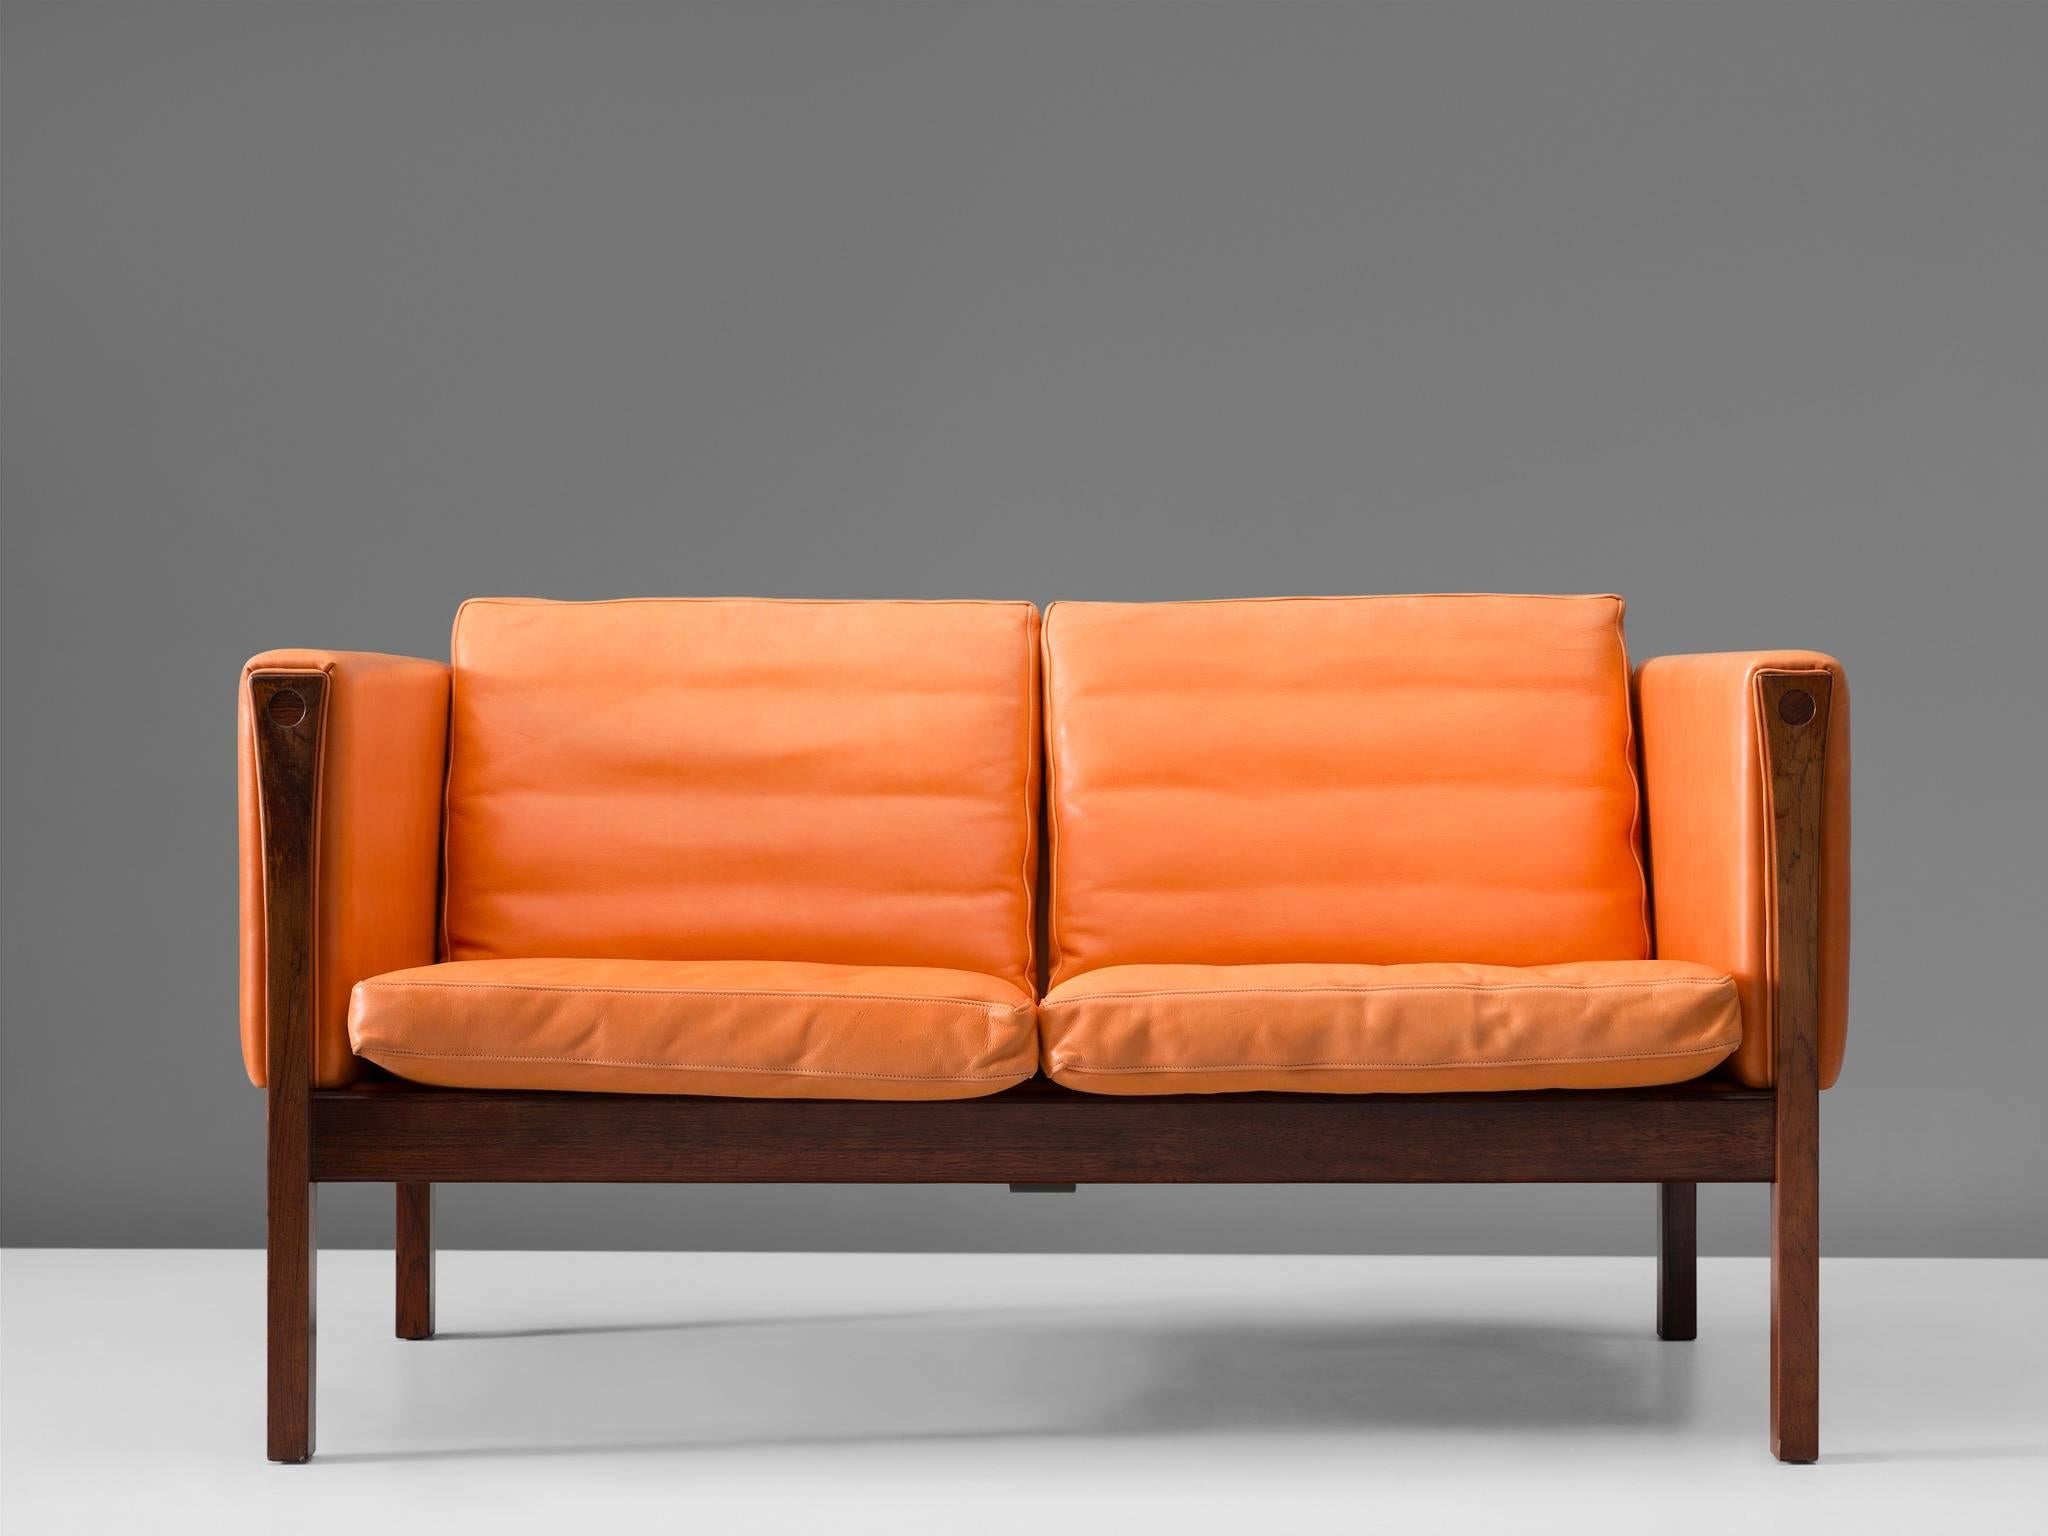 Settee, rosewood and leather by Hans Wegner, Denmark, 1965, early production form it's first manufacturer.

This model AP-63-2 by Hans Wegner is a seemingly simple design. Yet with this sofa, Wegner has designed a flawlessly constructed and above